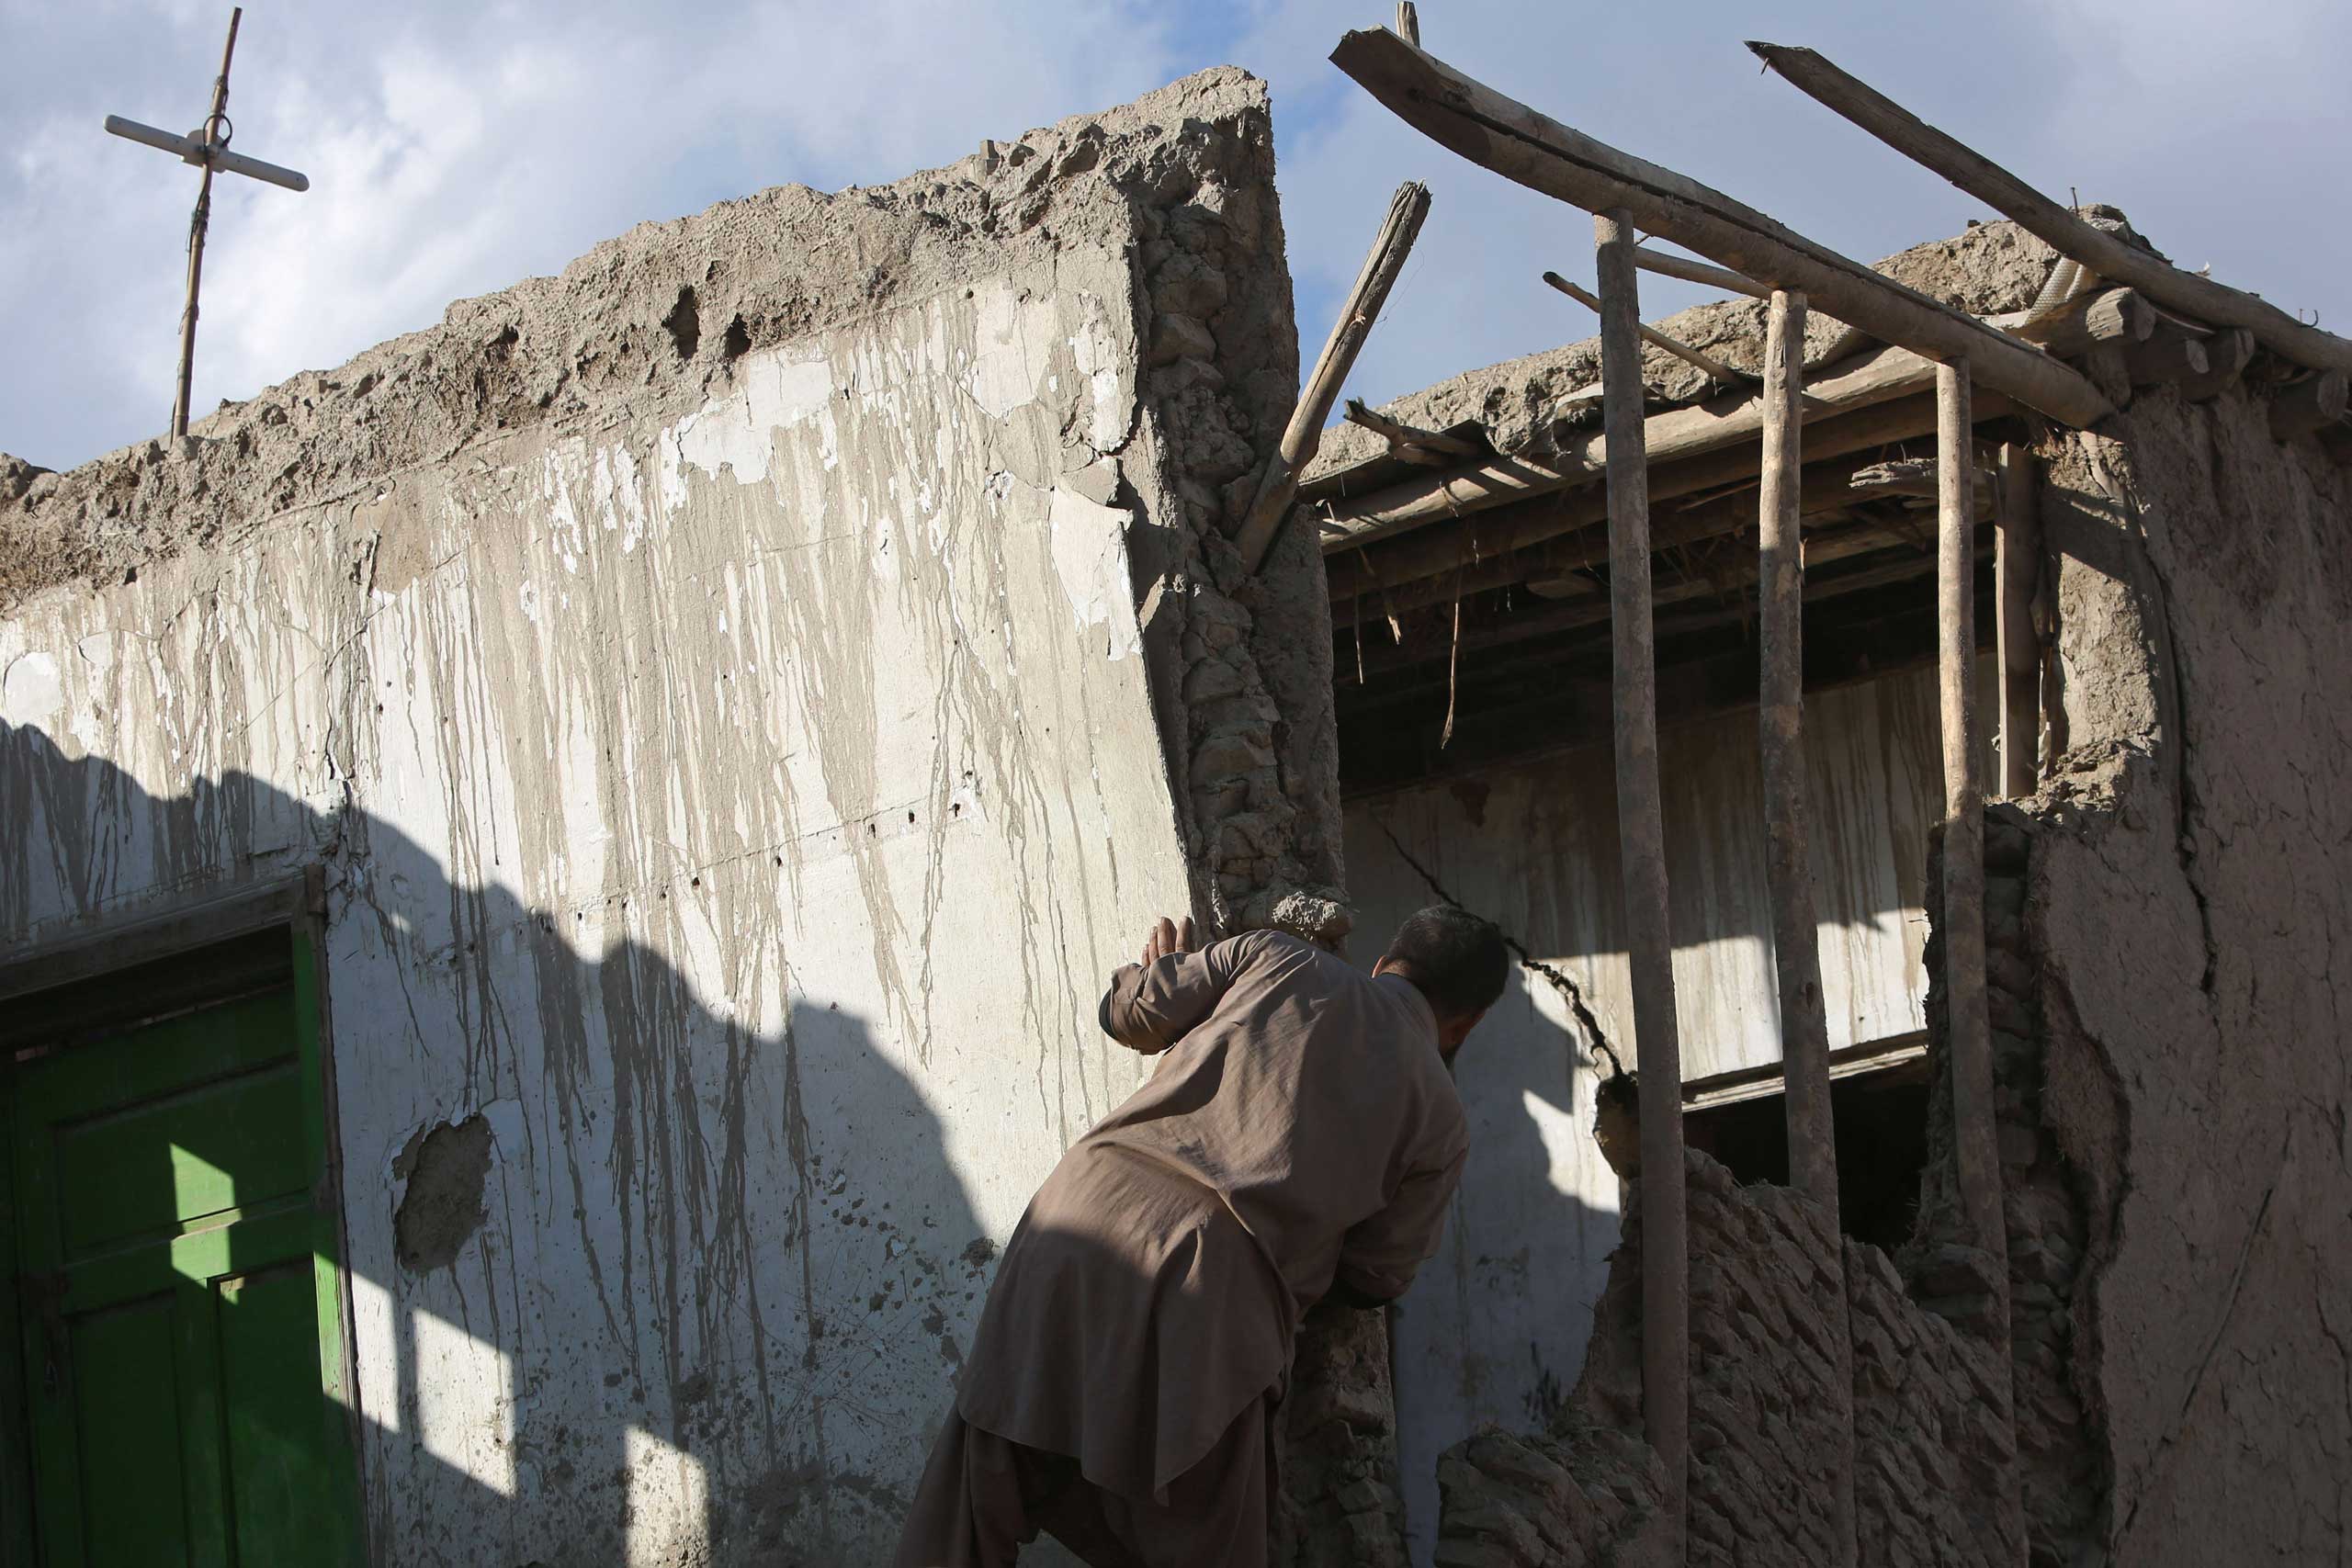 An Afghan man looks at a damaged house following a powerful earthquake today that could be felt across South Asia, in Kabul, on Oct. 26, 2015.